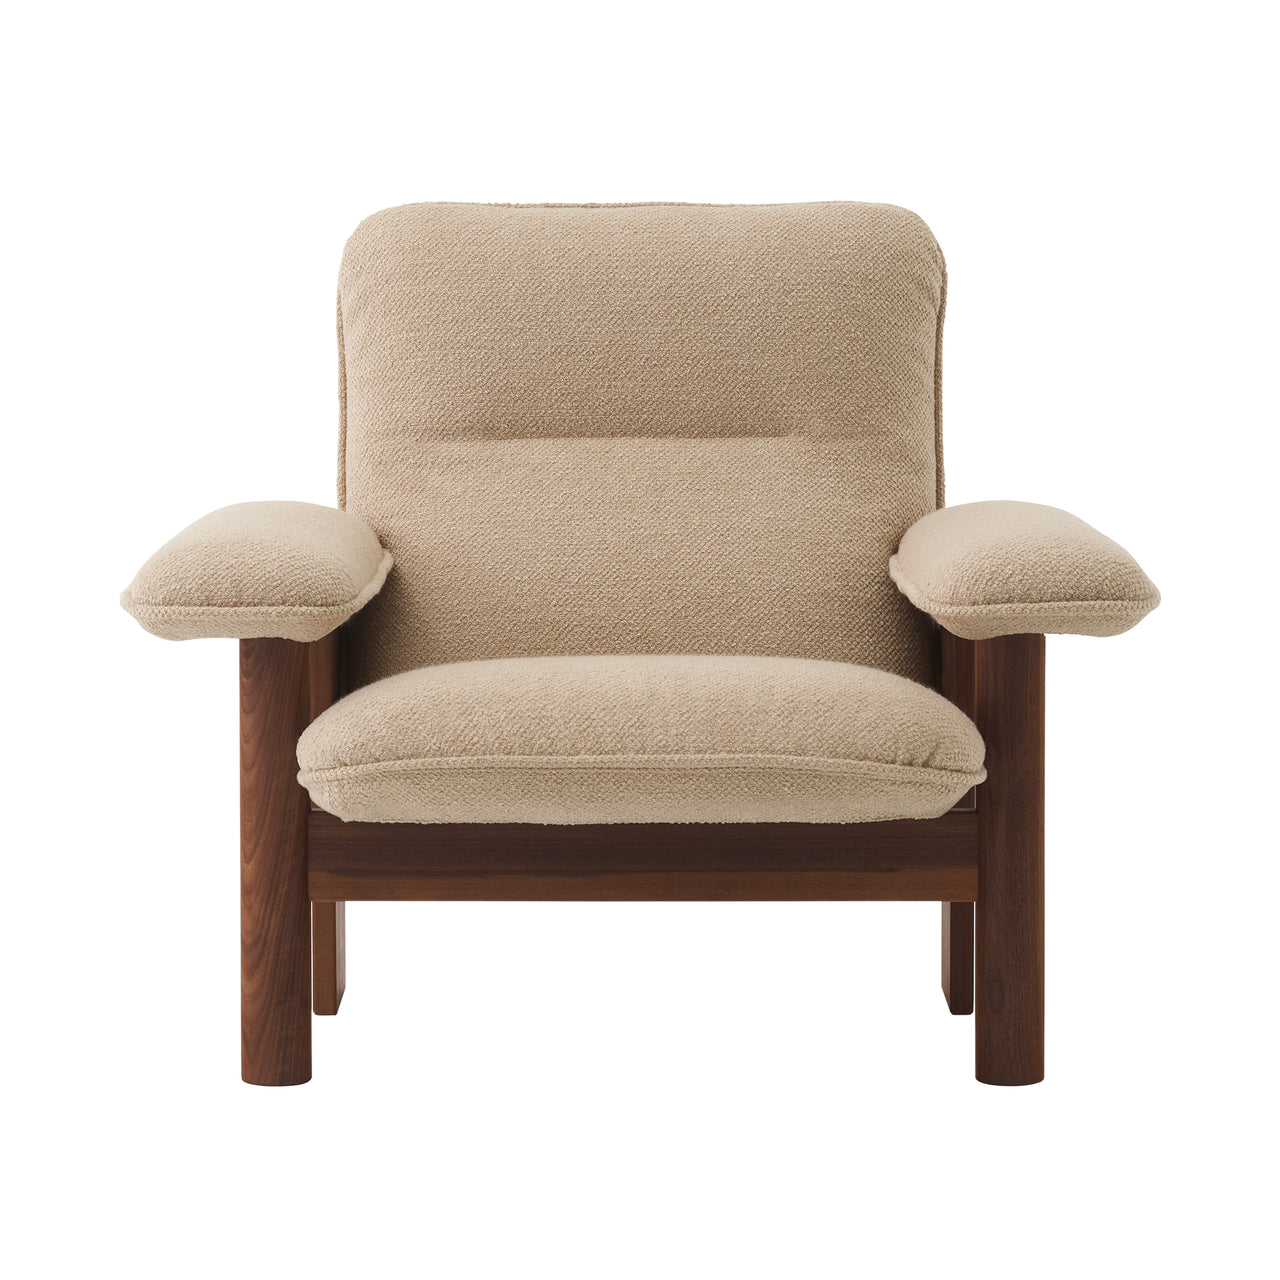 Brasília Lounge Chair: Upholstered + Dark Stained Oak + Boucle 02